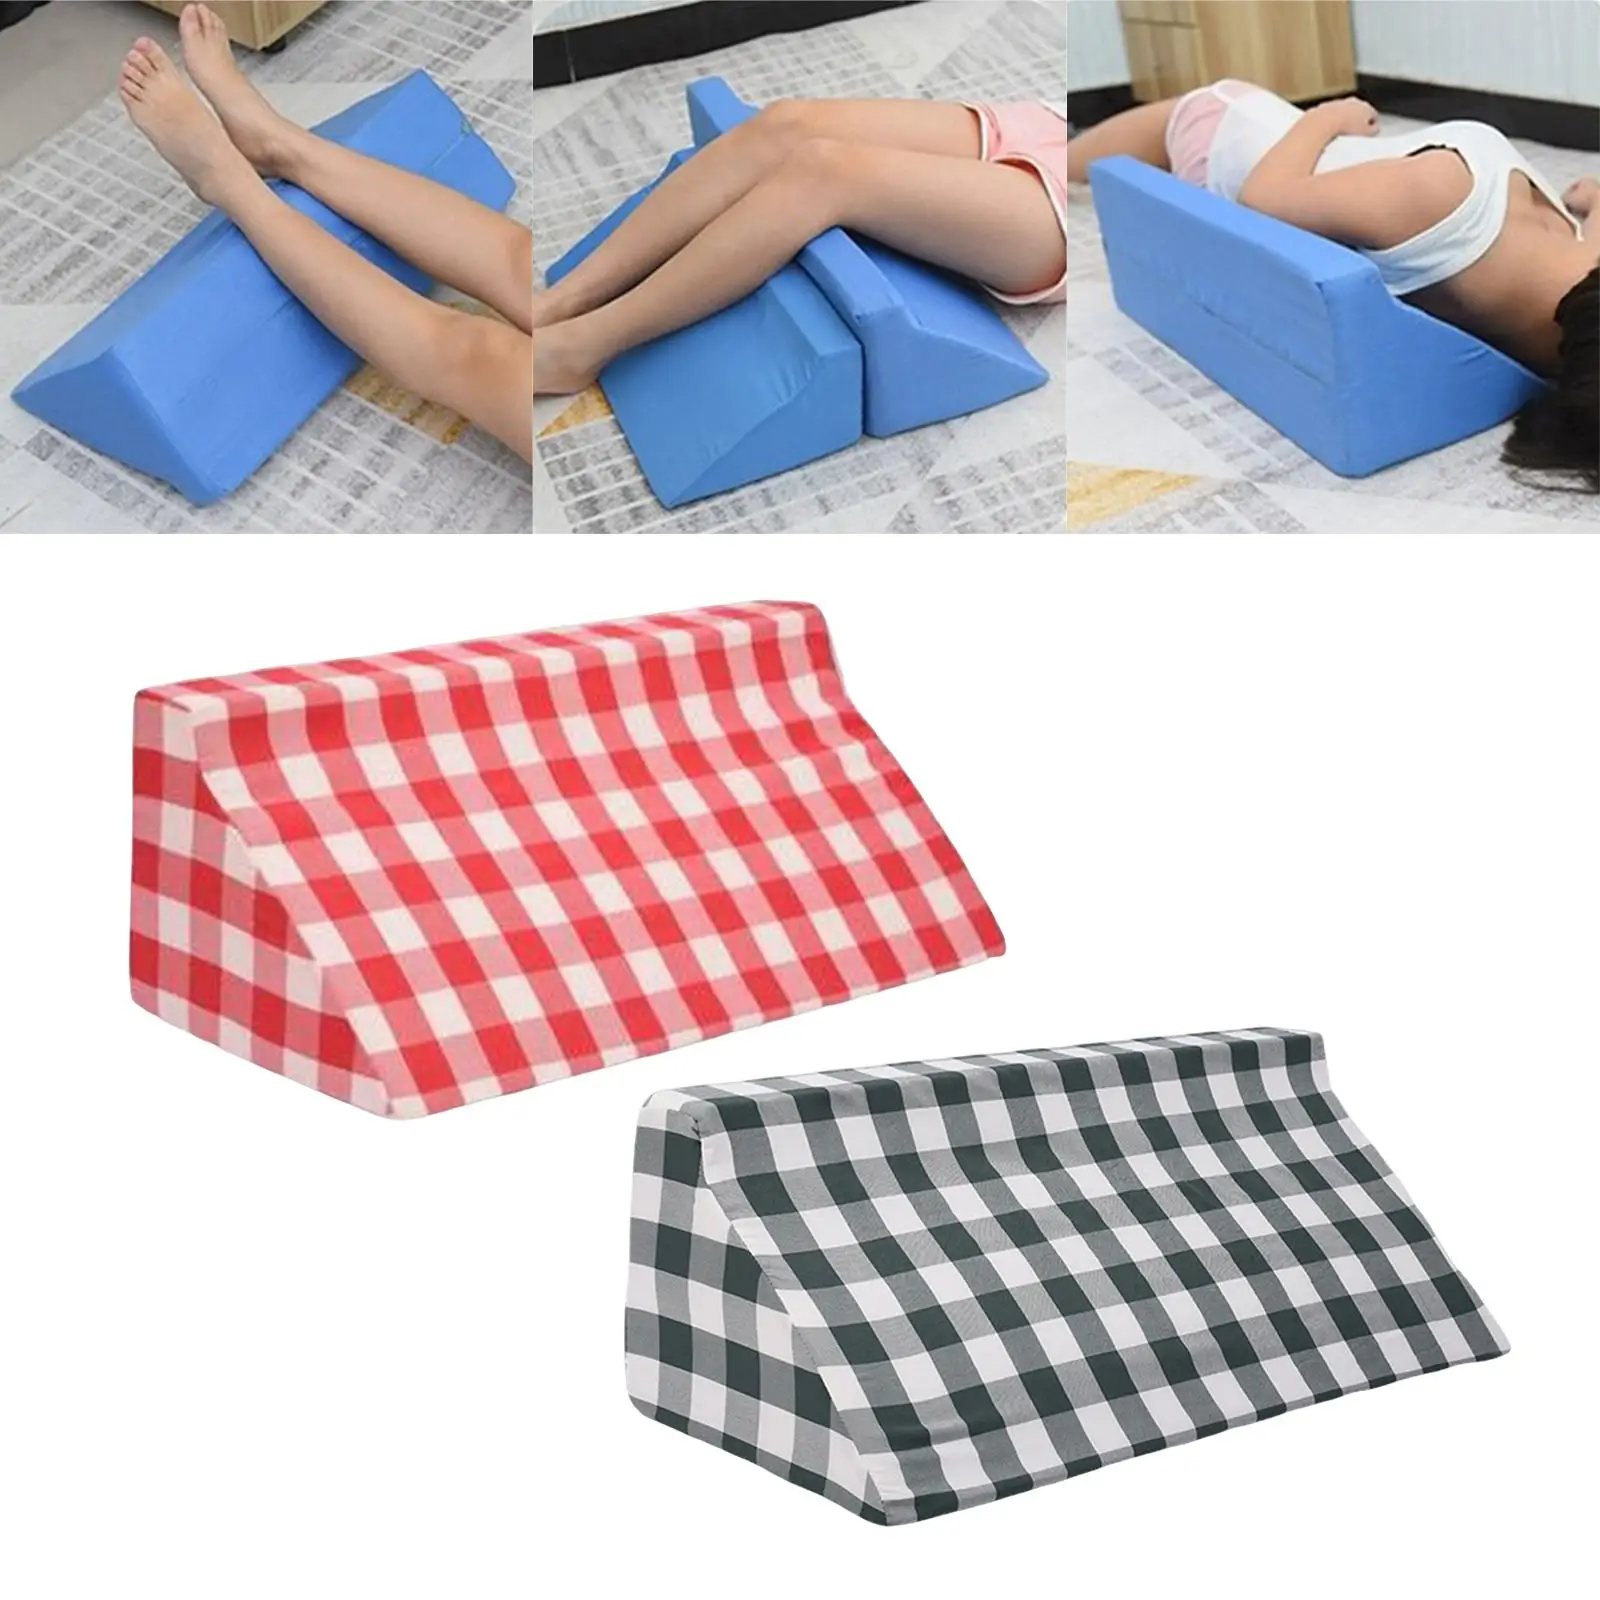 Foam Wedge s for Back for Sleeping Positioning Triangle Cushion Bed Wedge  for Disable Seniors Adults Elderly